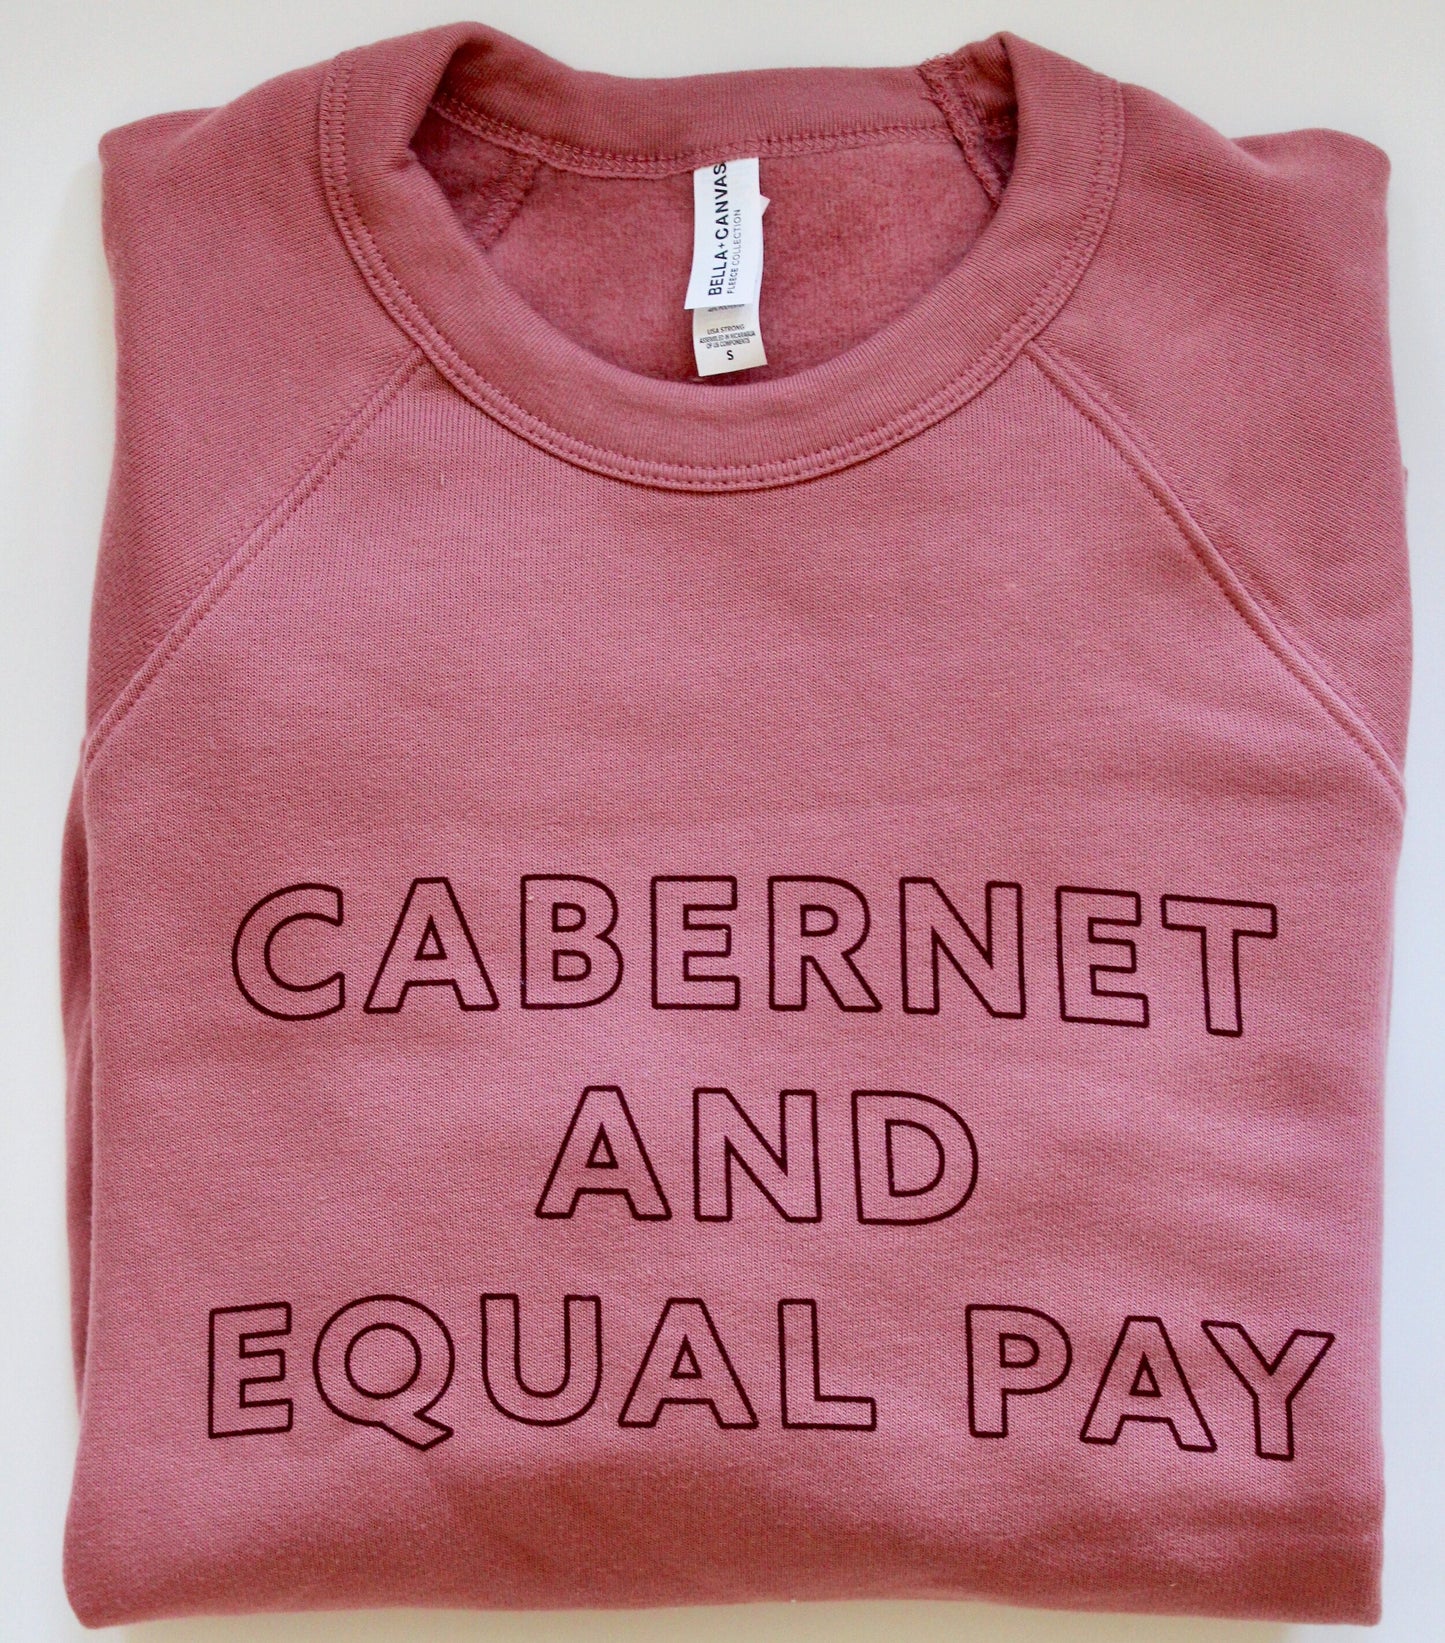 Pink crewneck sweatshirt with "Cabernet and Equal Pay" block writing